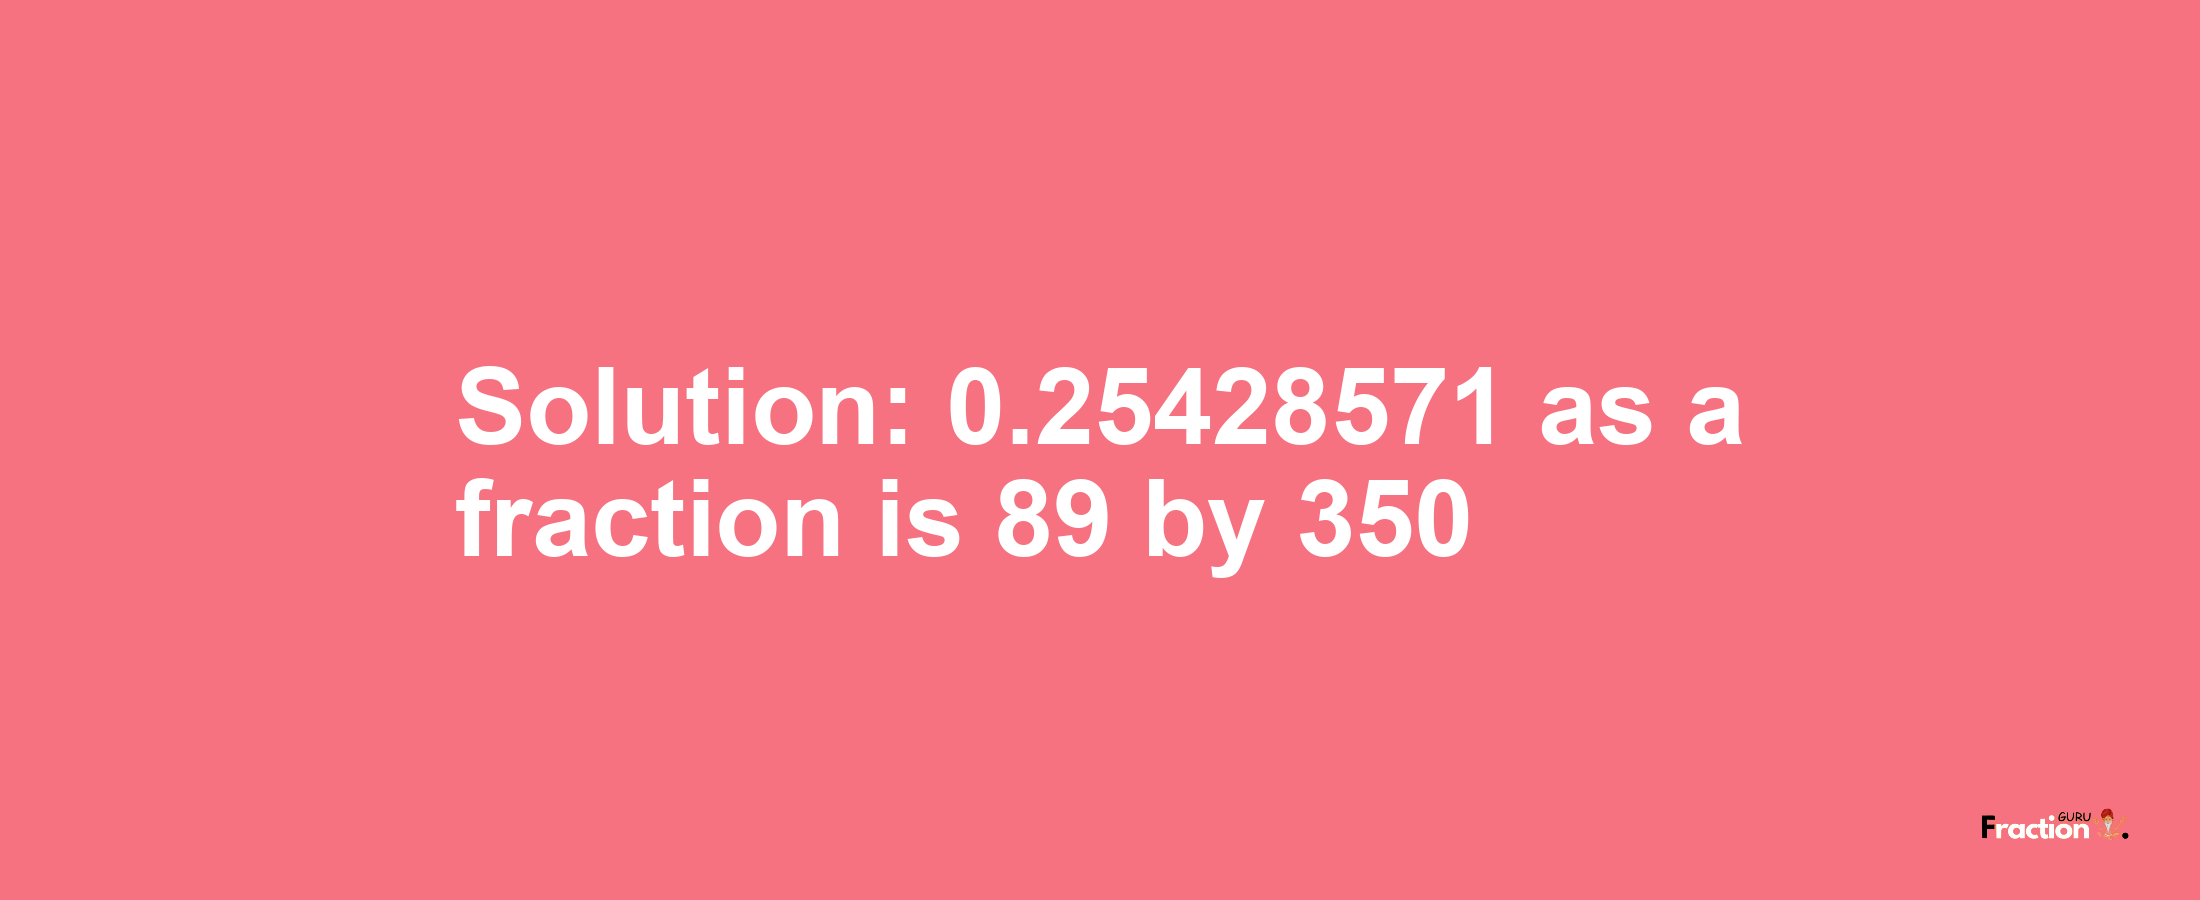 Solution:0.25428571 as a fraction is 89/350